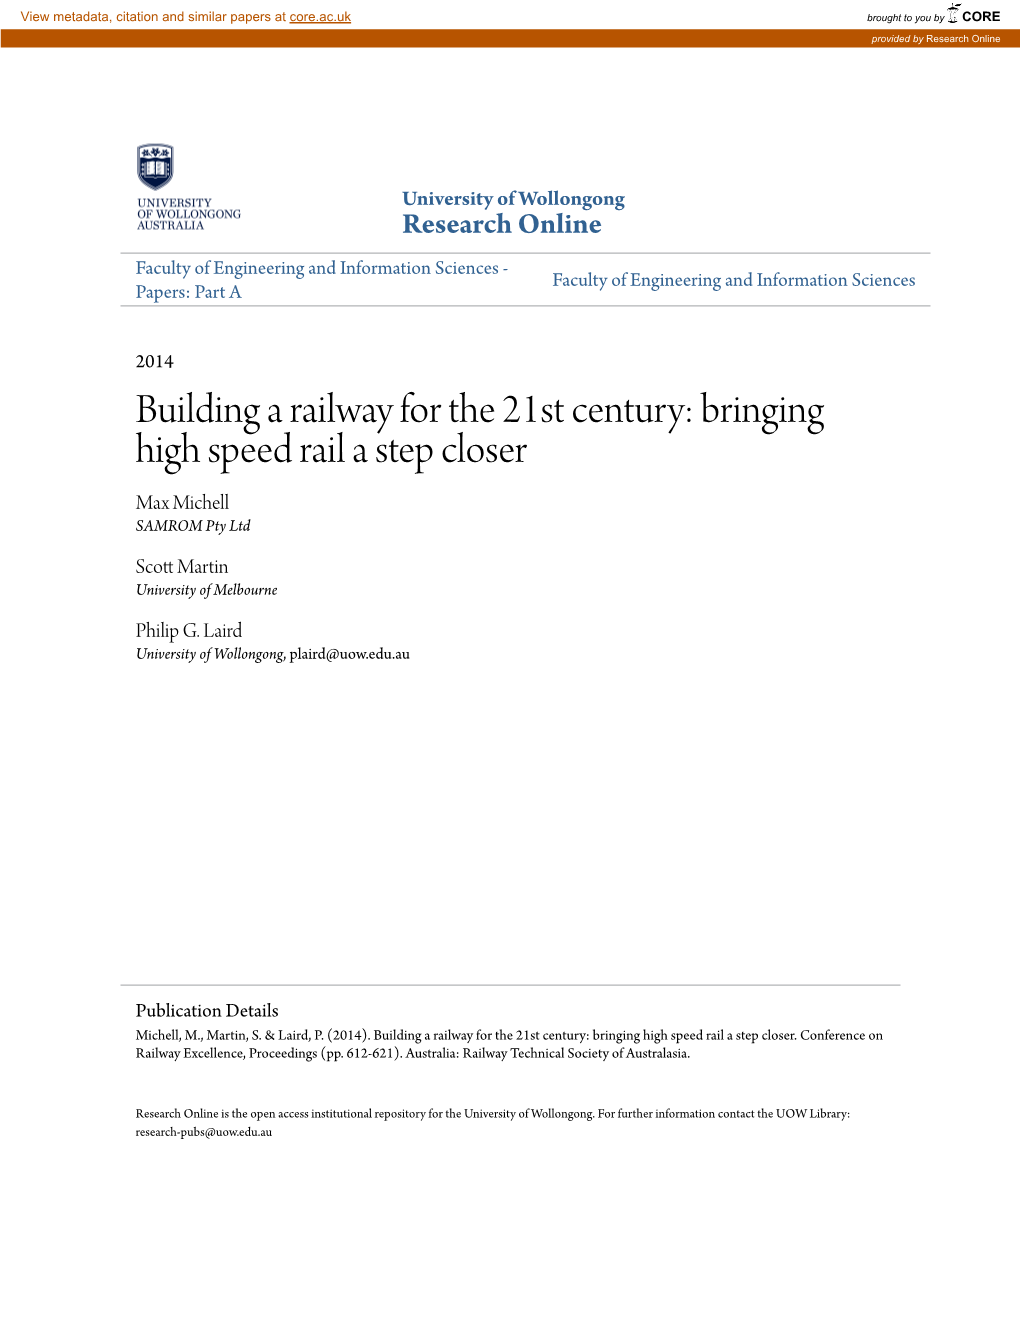 Building a Railway for the 21St Century: Bringing High Speed Rail a Step Closer Max Michell SAMROM Pty Ltd